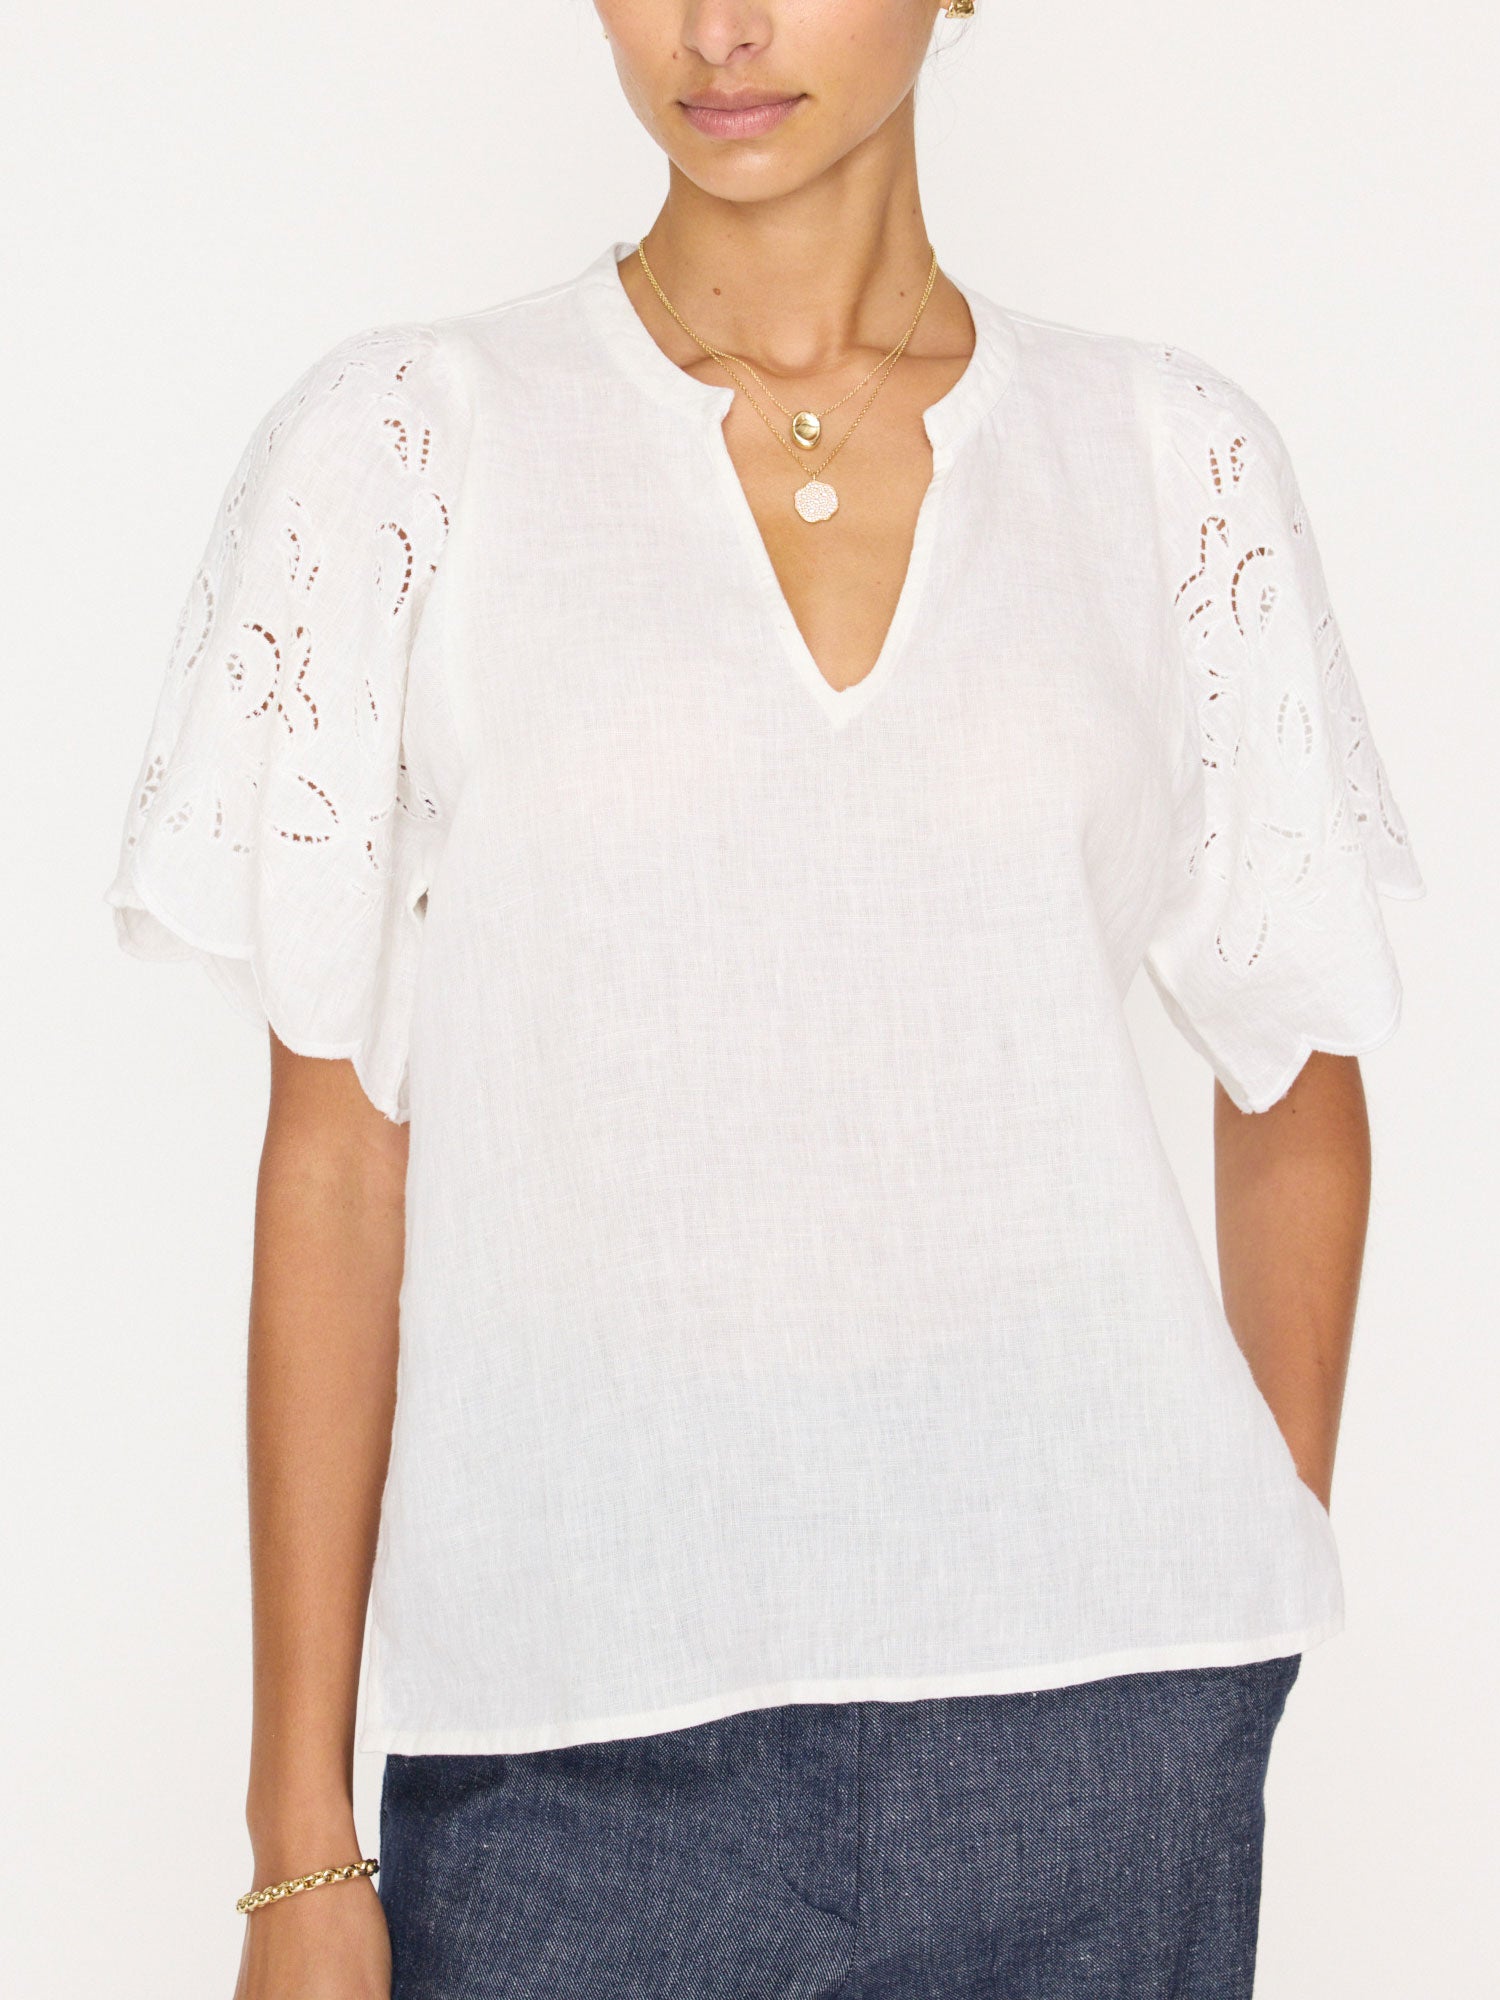 Shore linen embroidered sleeve white top front view 3